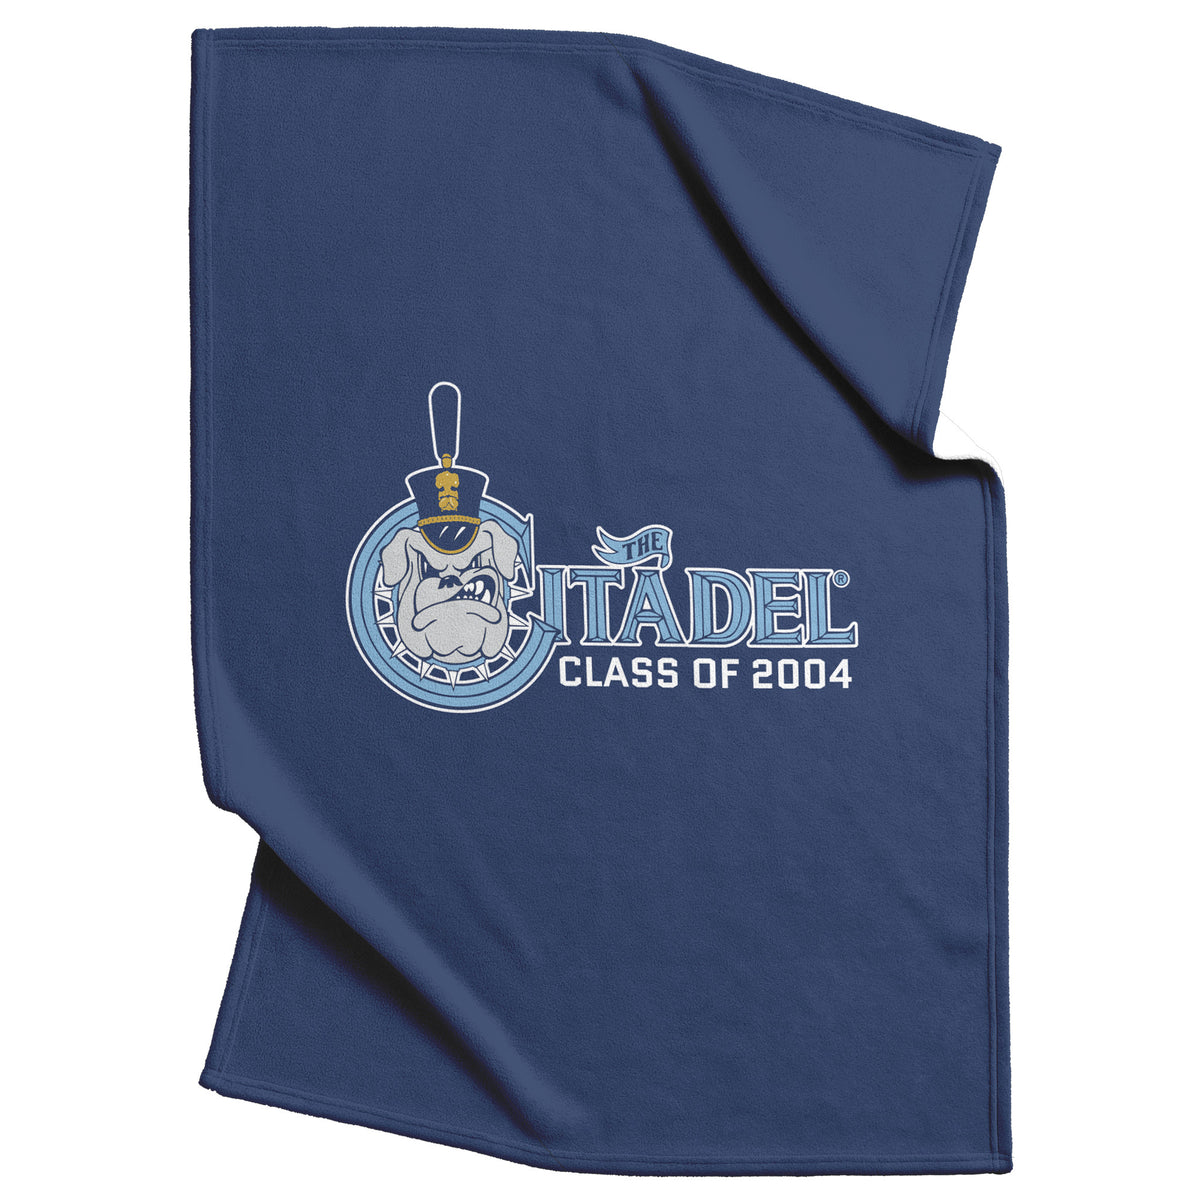 The Citadel Spike, Class of 2004 Blanket